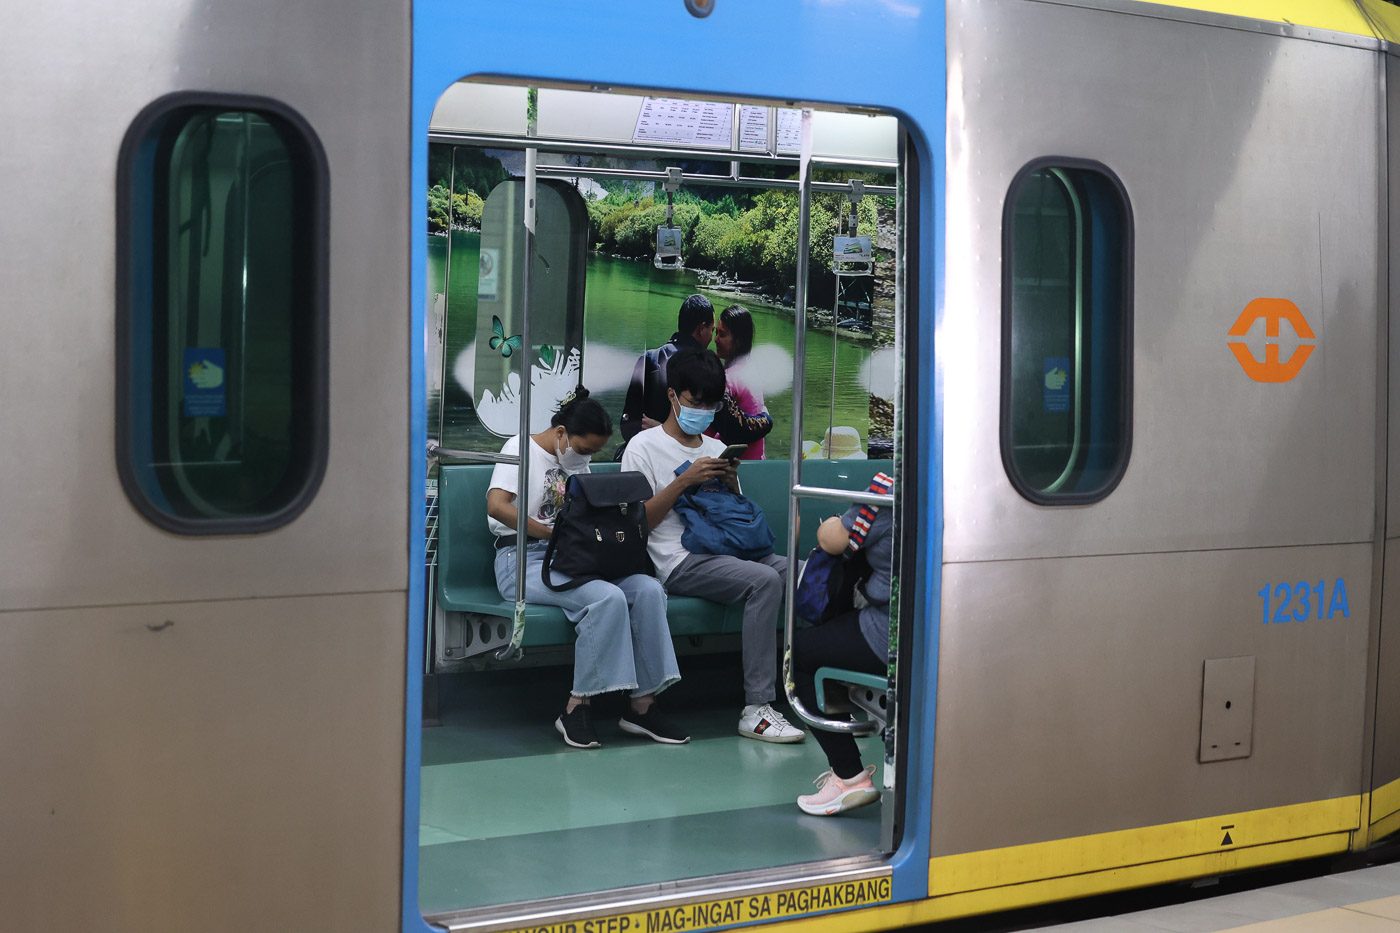 LRT1 rides limited to Gil Puyat-Fernando Poe Jr. route from August 25 to 27